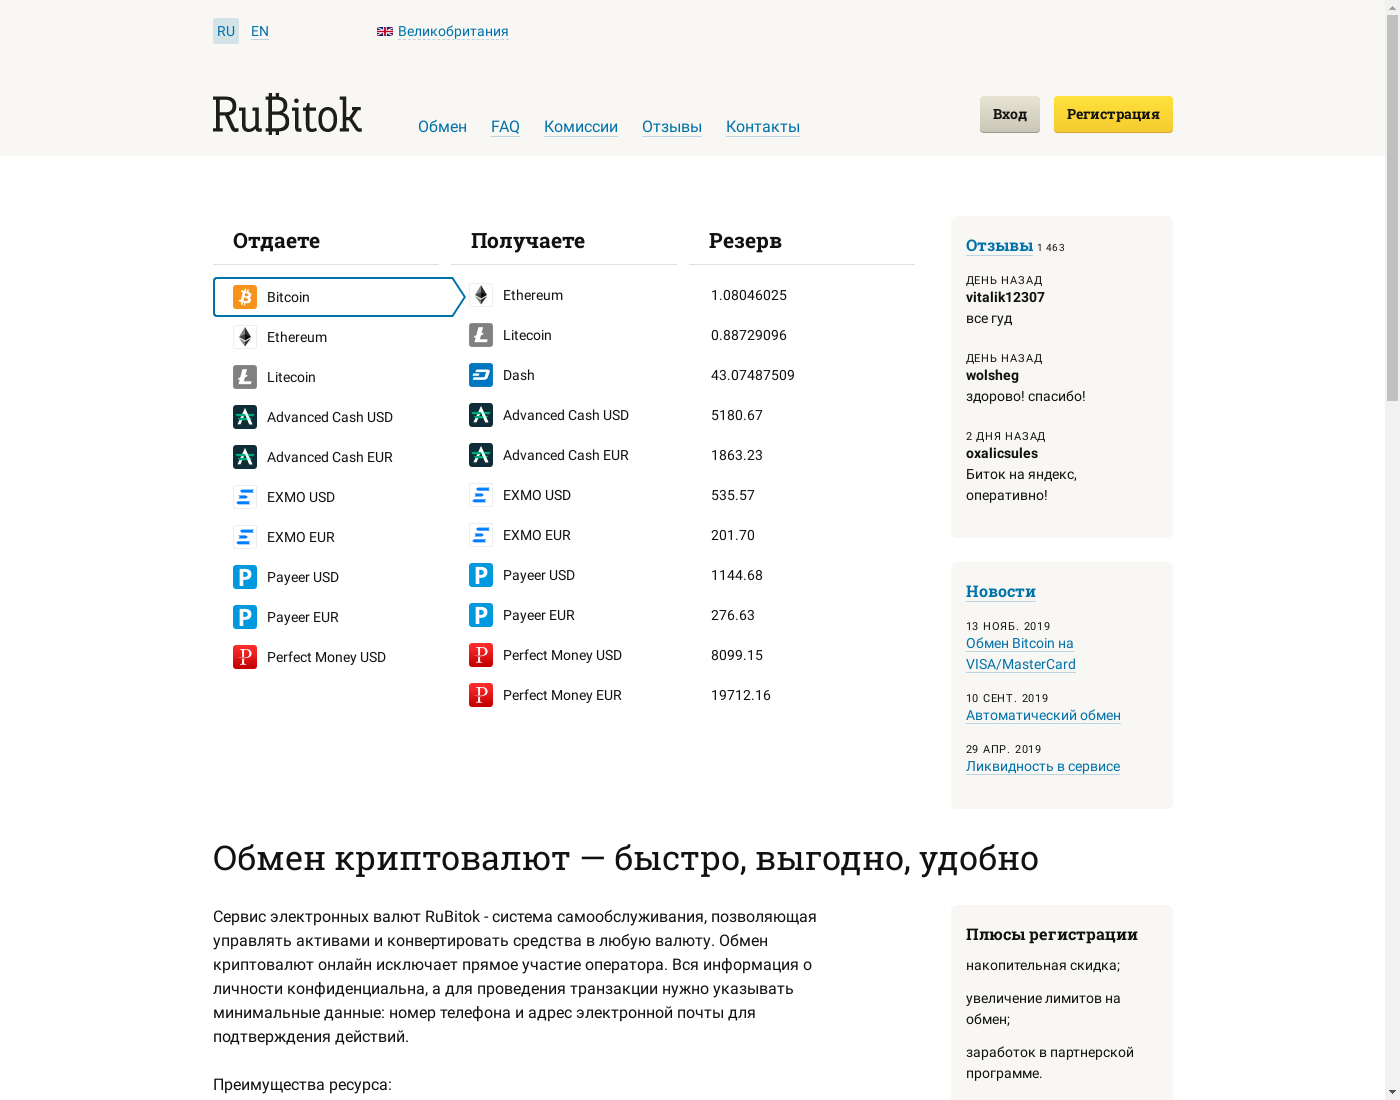 ruBitok user interface: the home page in English